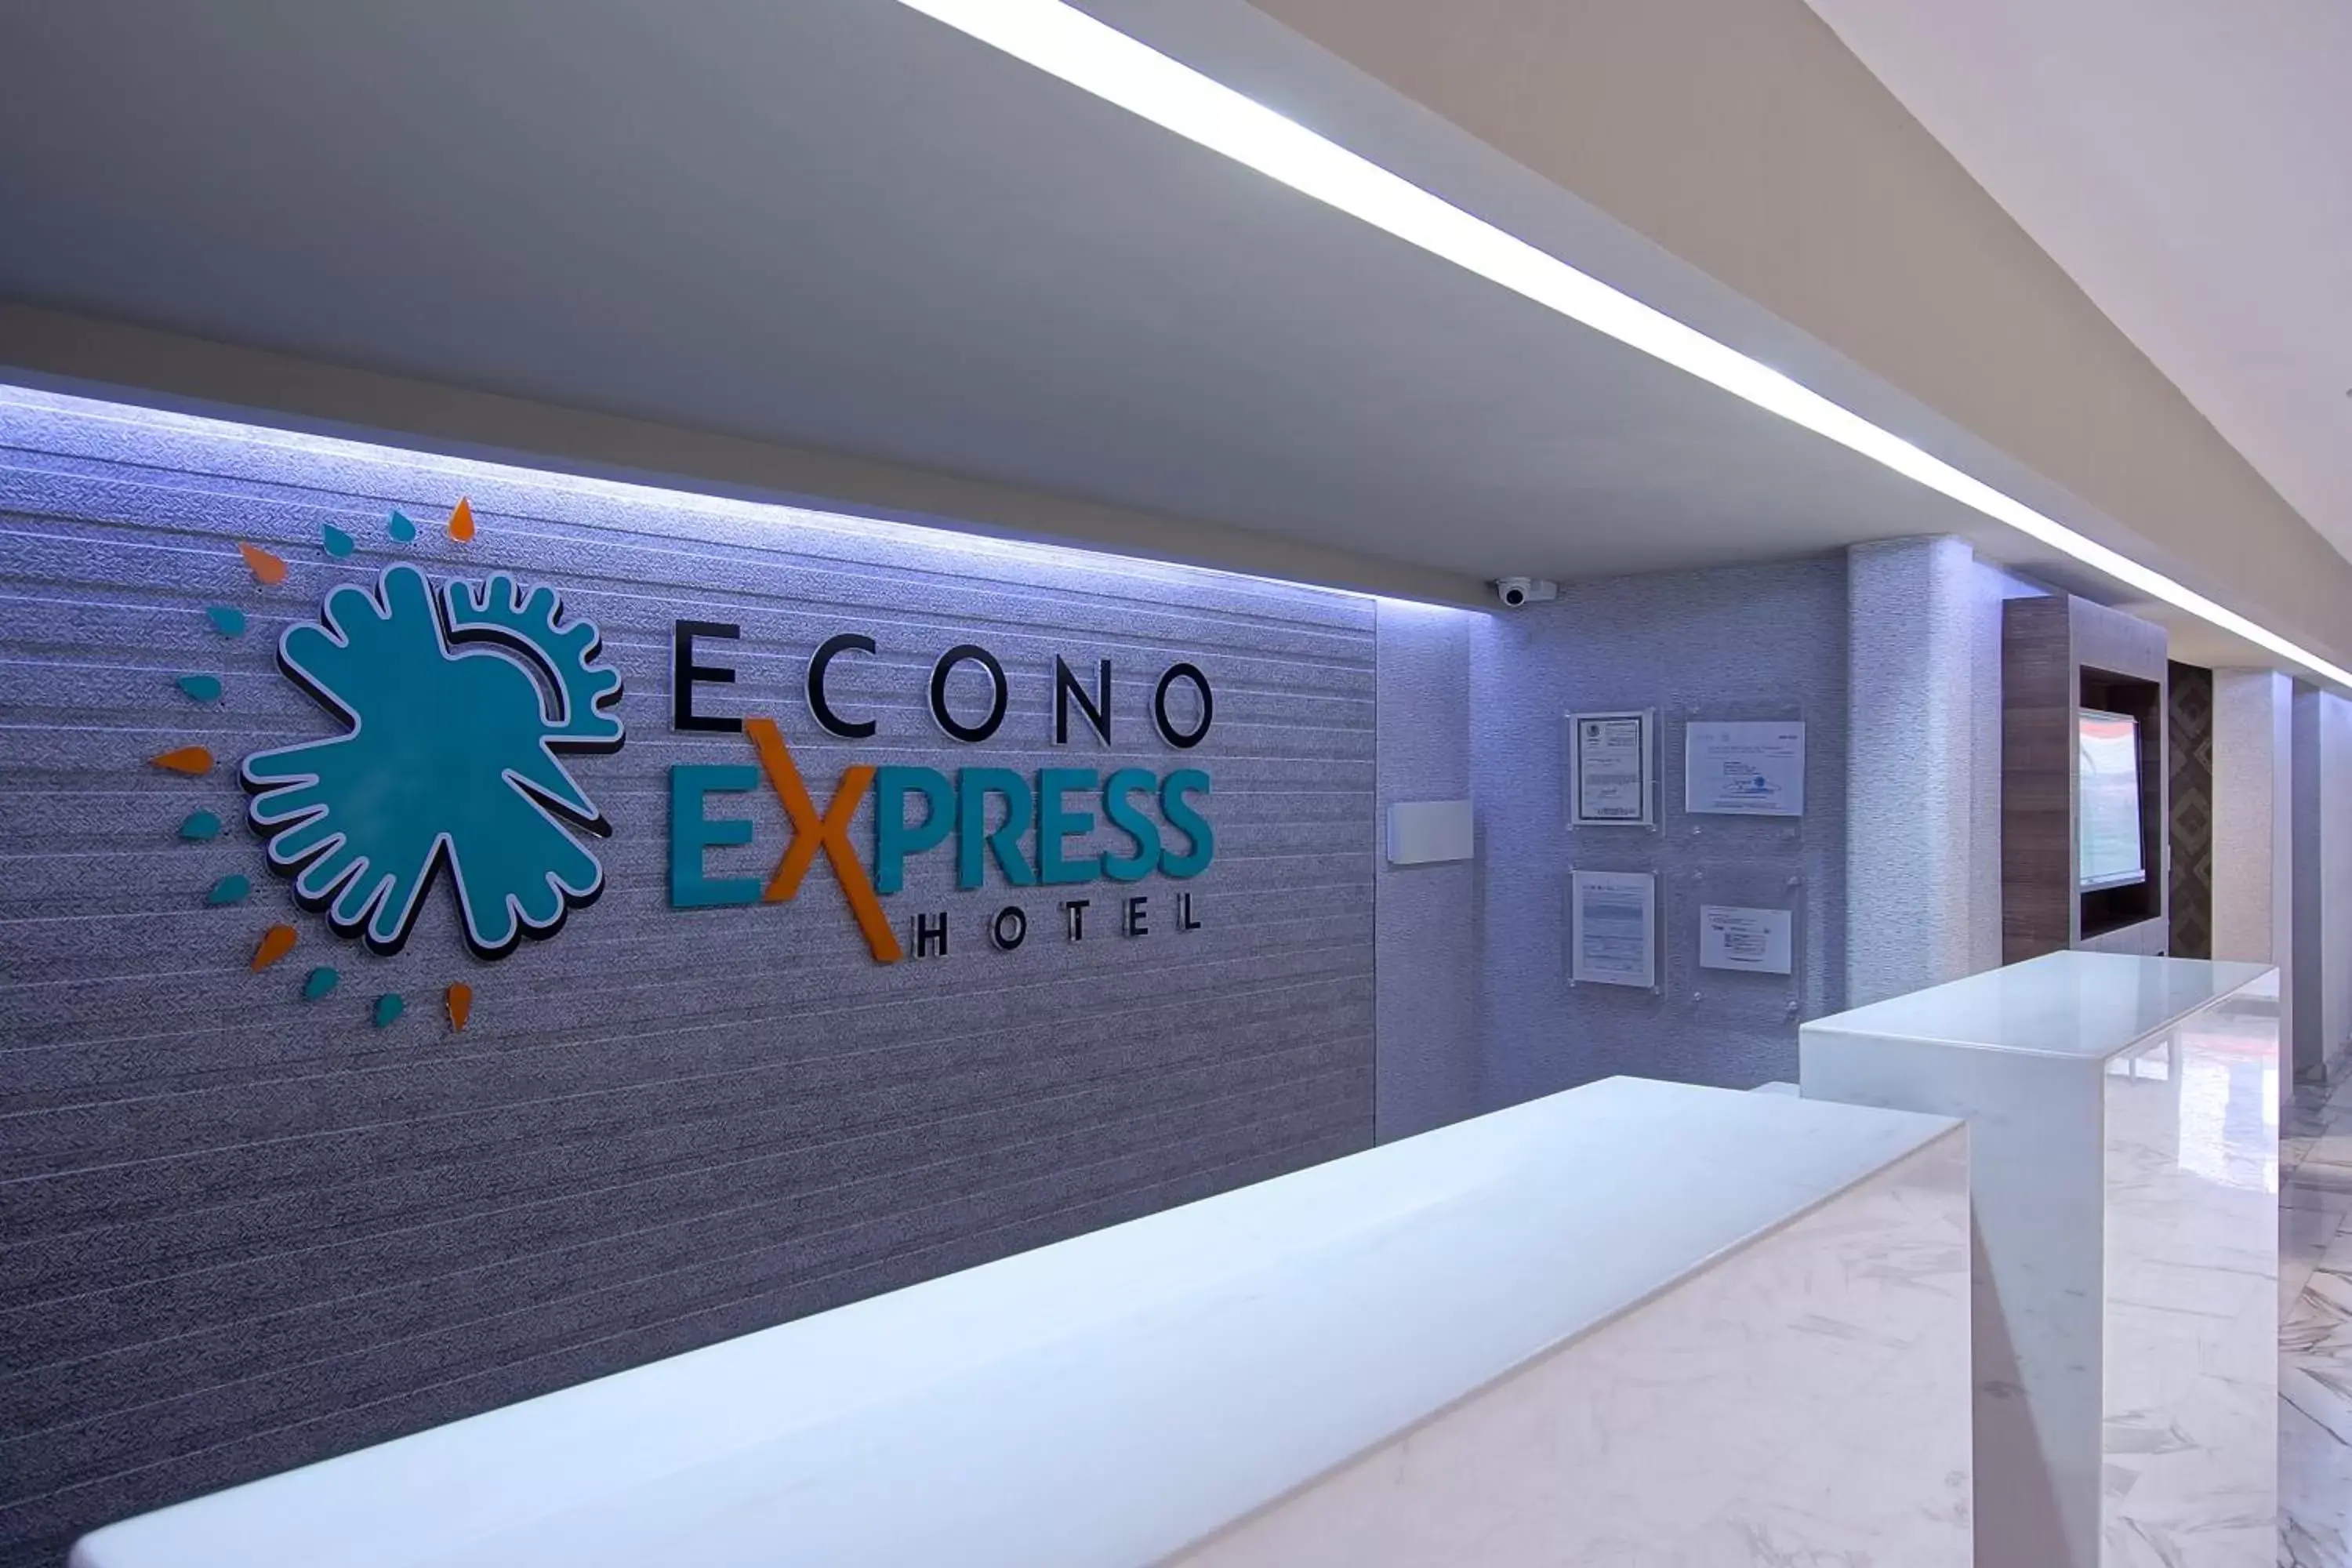 Property logo or sign in Econo Express Hotel